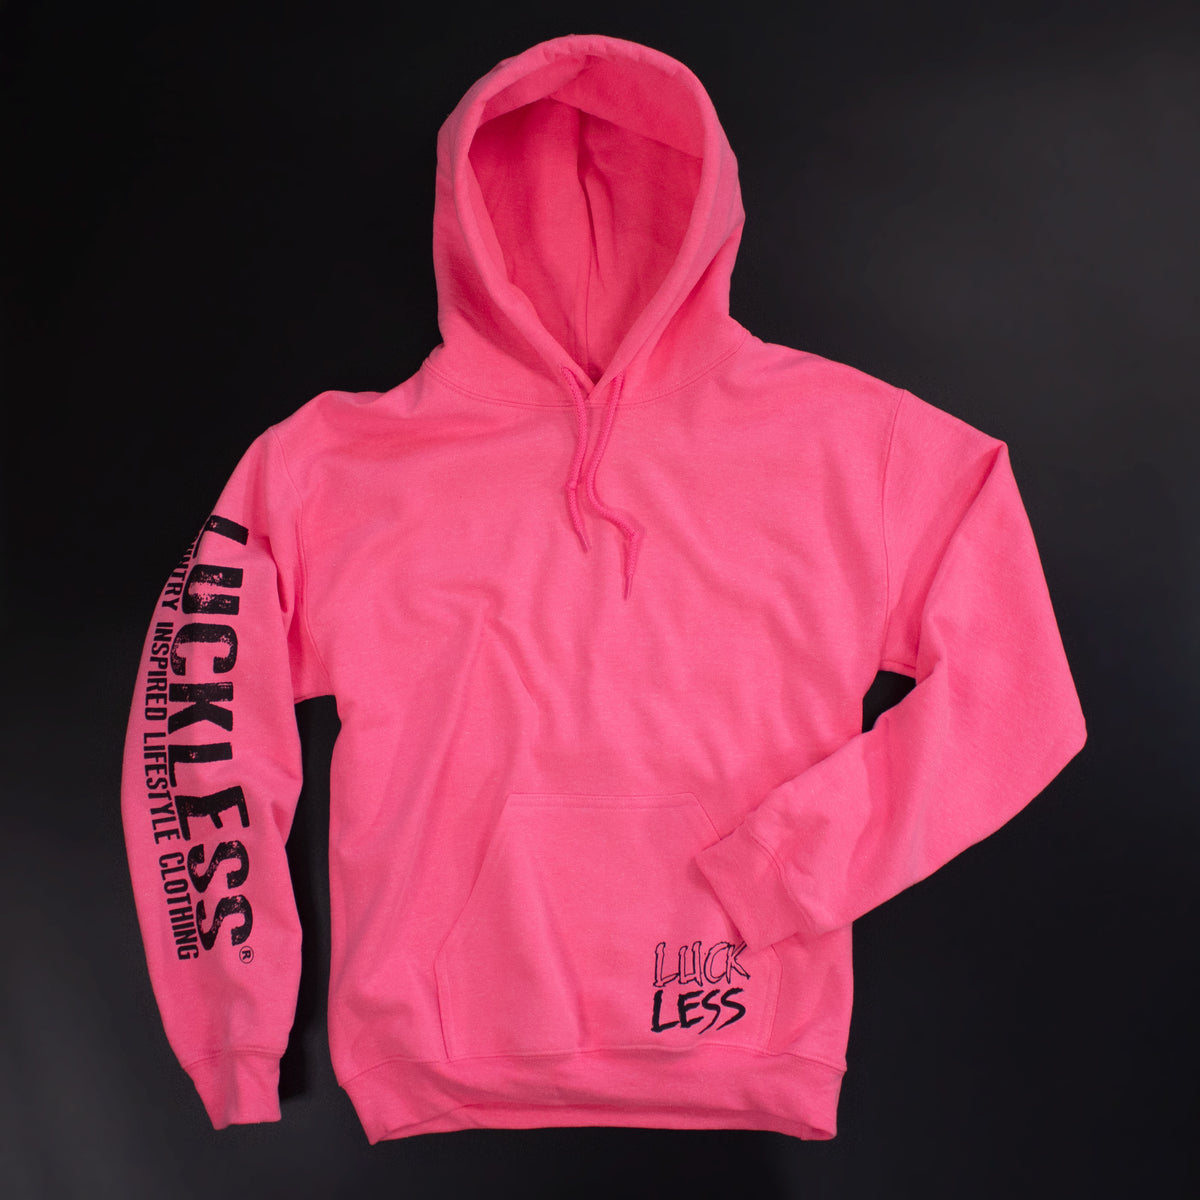 Dirty Hooker Classic Black Dry Fit Dry Fit / Neon Pink / XL